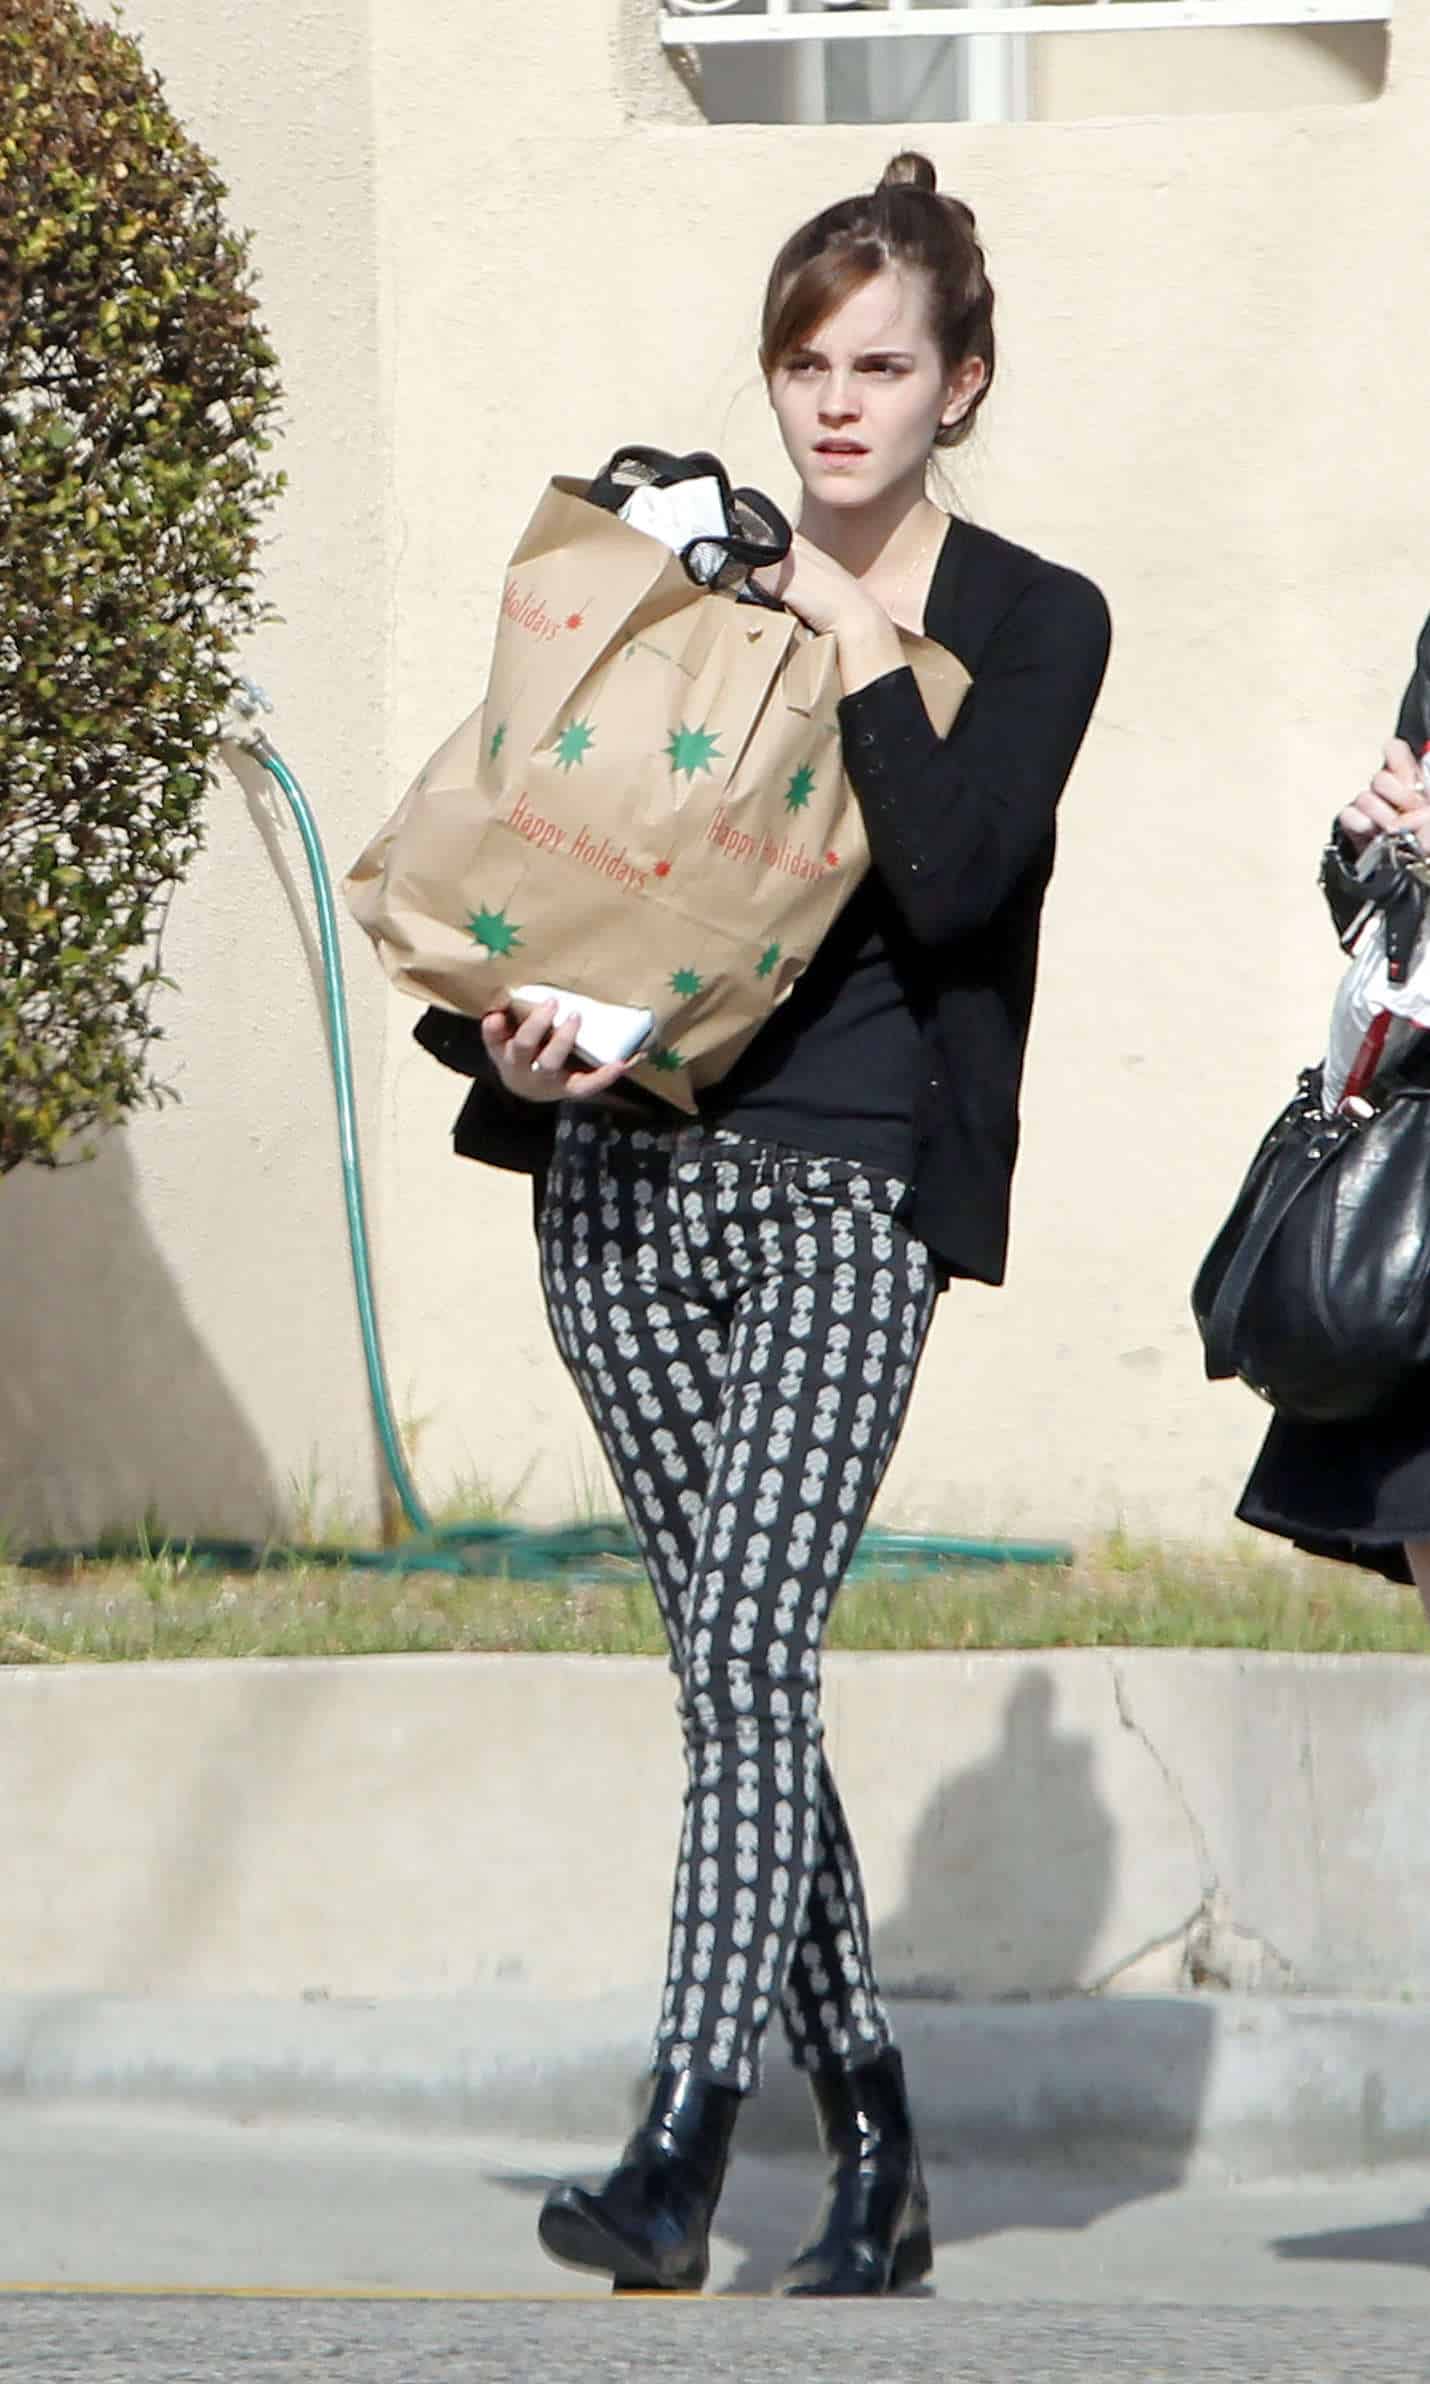 Emma Watson Has a Blast During Shopping Spree with her Friend in LA